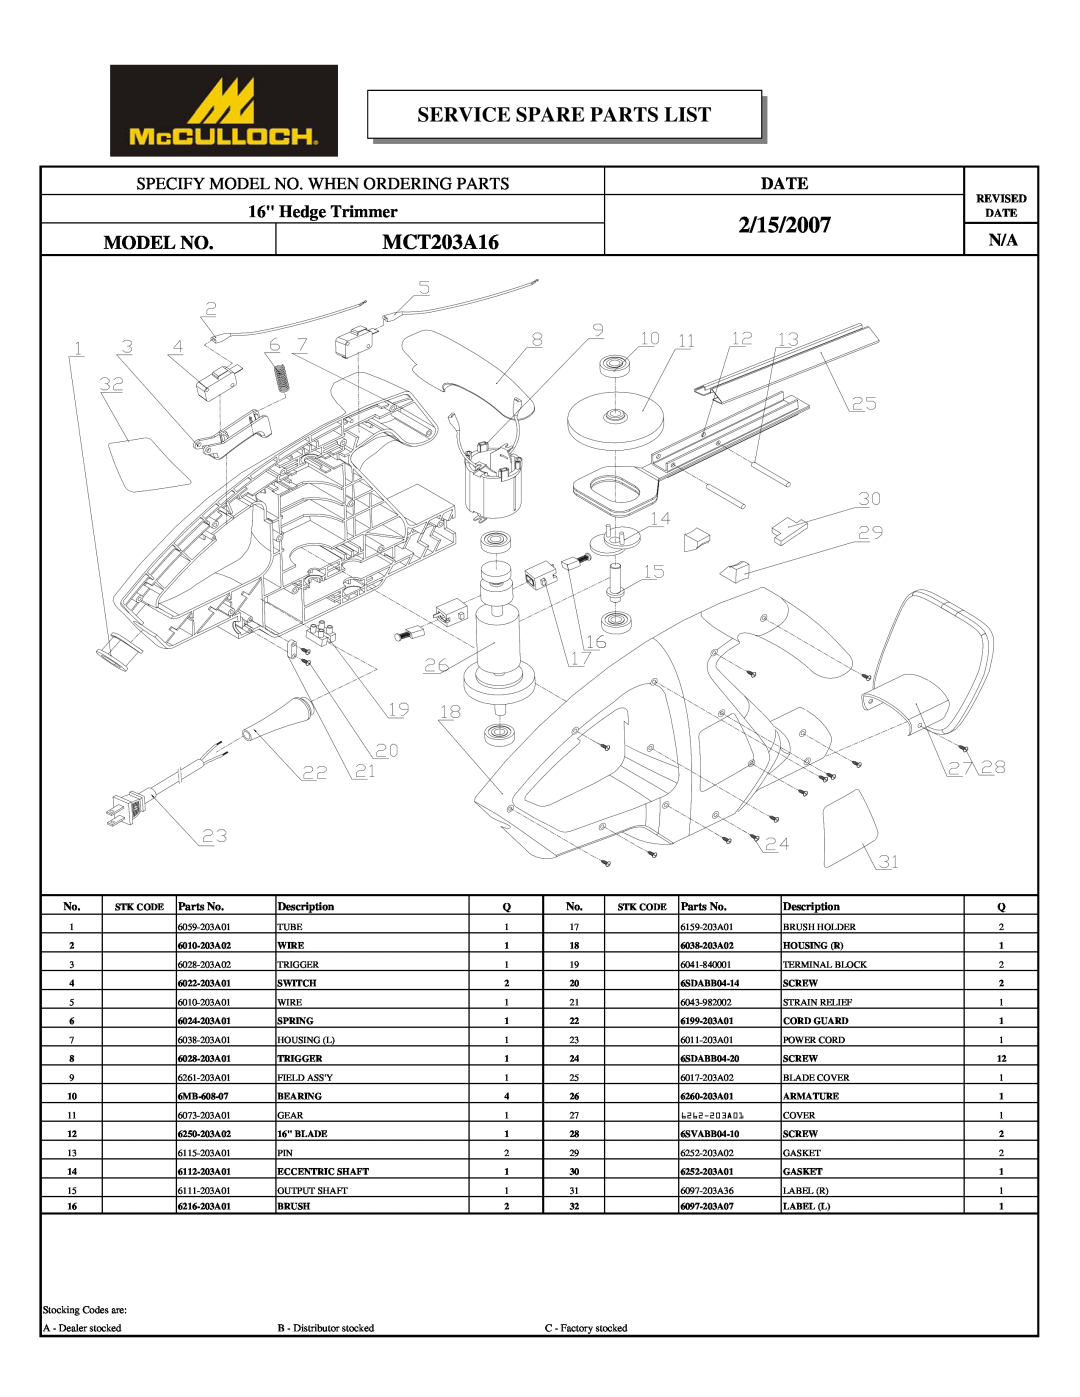 McCulloch MCT203A20 2/15/2007, Service Spare Parts List, MCT203A16, Specify Model No. When Ordering Parts, Date 